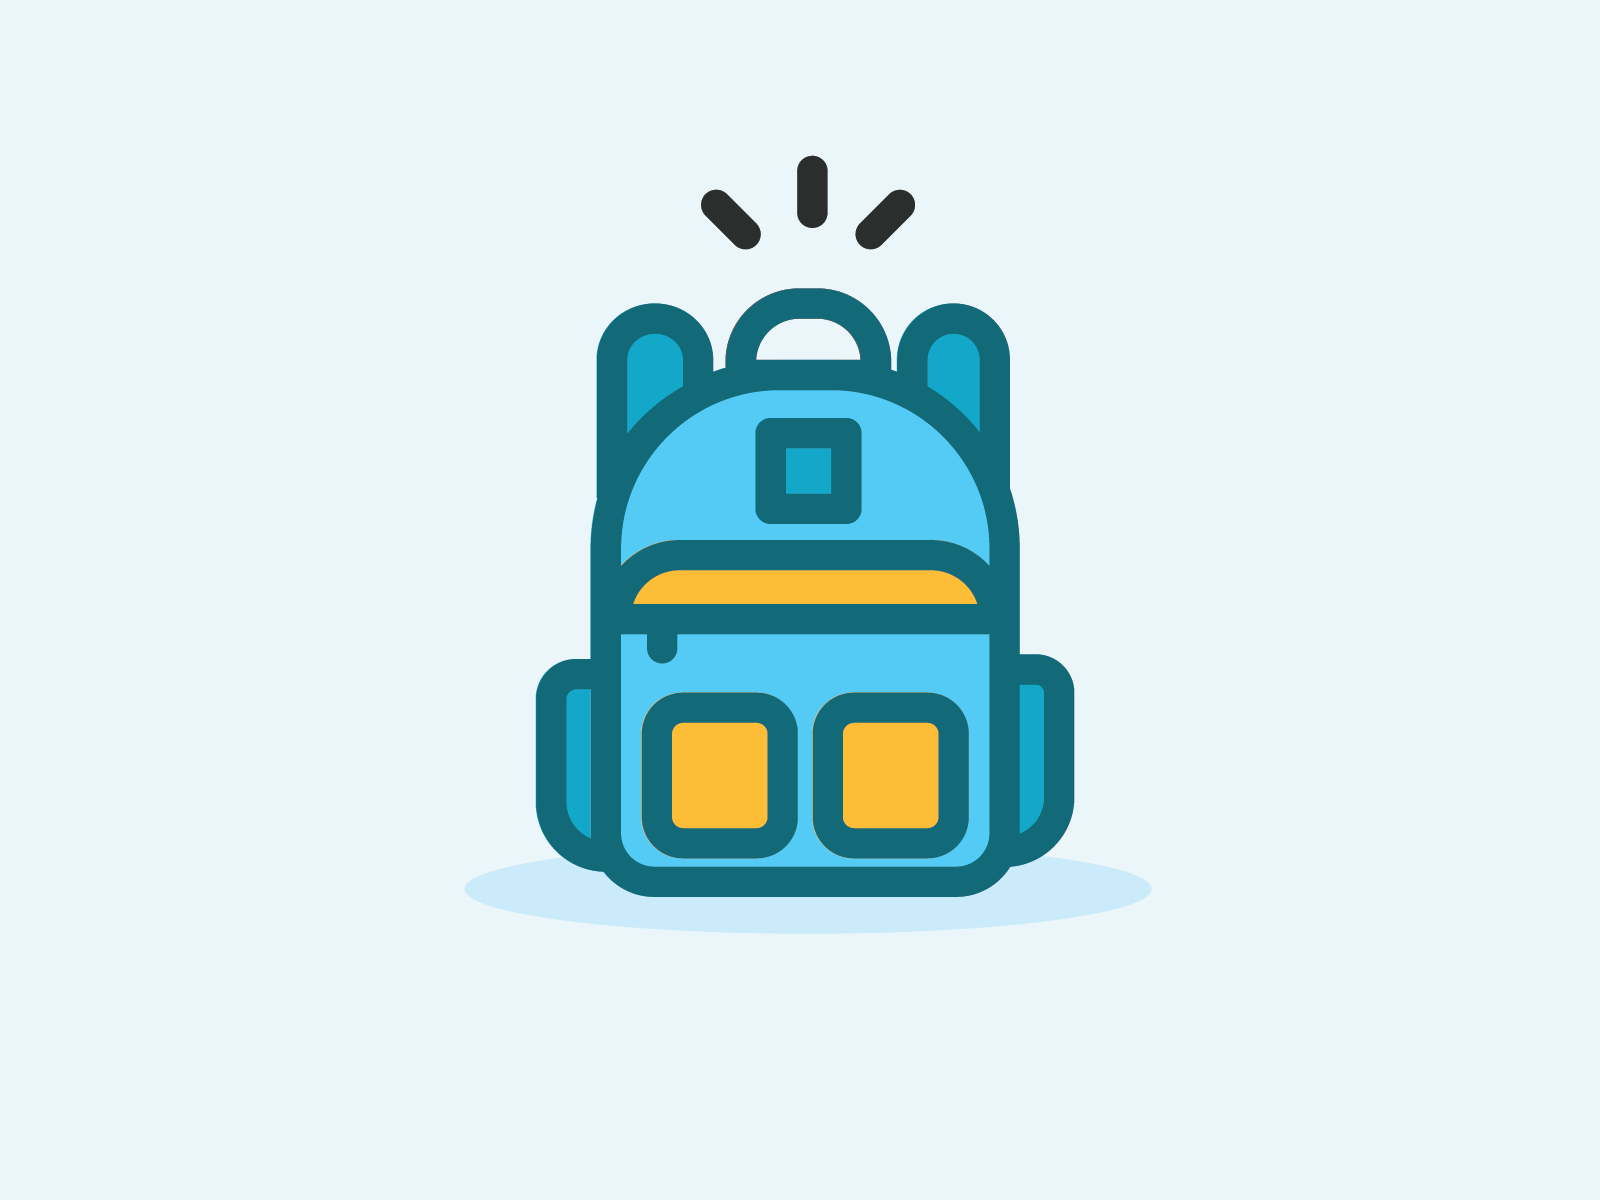 Filled Line Bag Icon by Kawalan icon on Dribbble